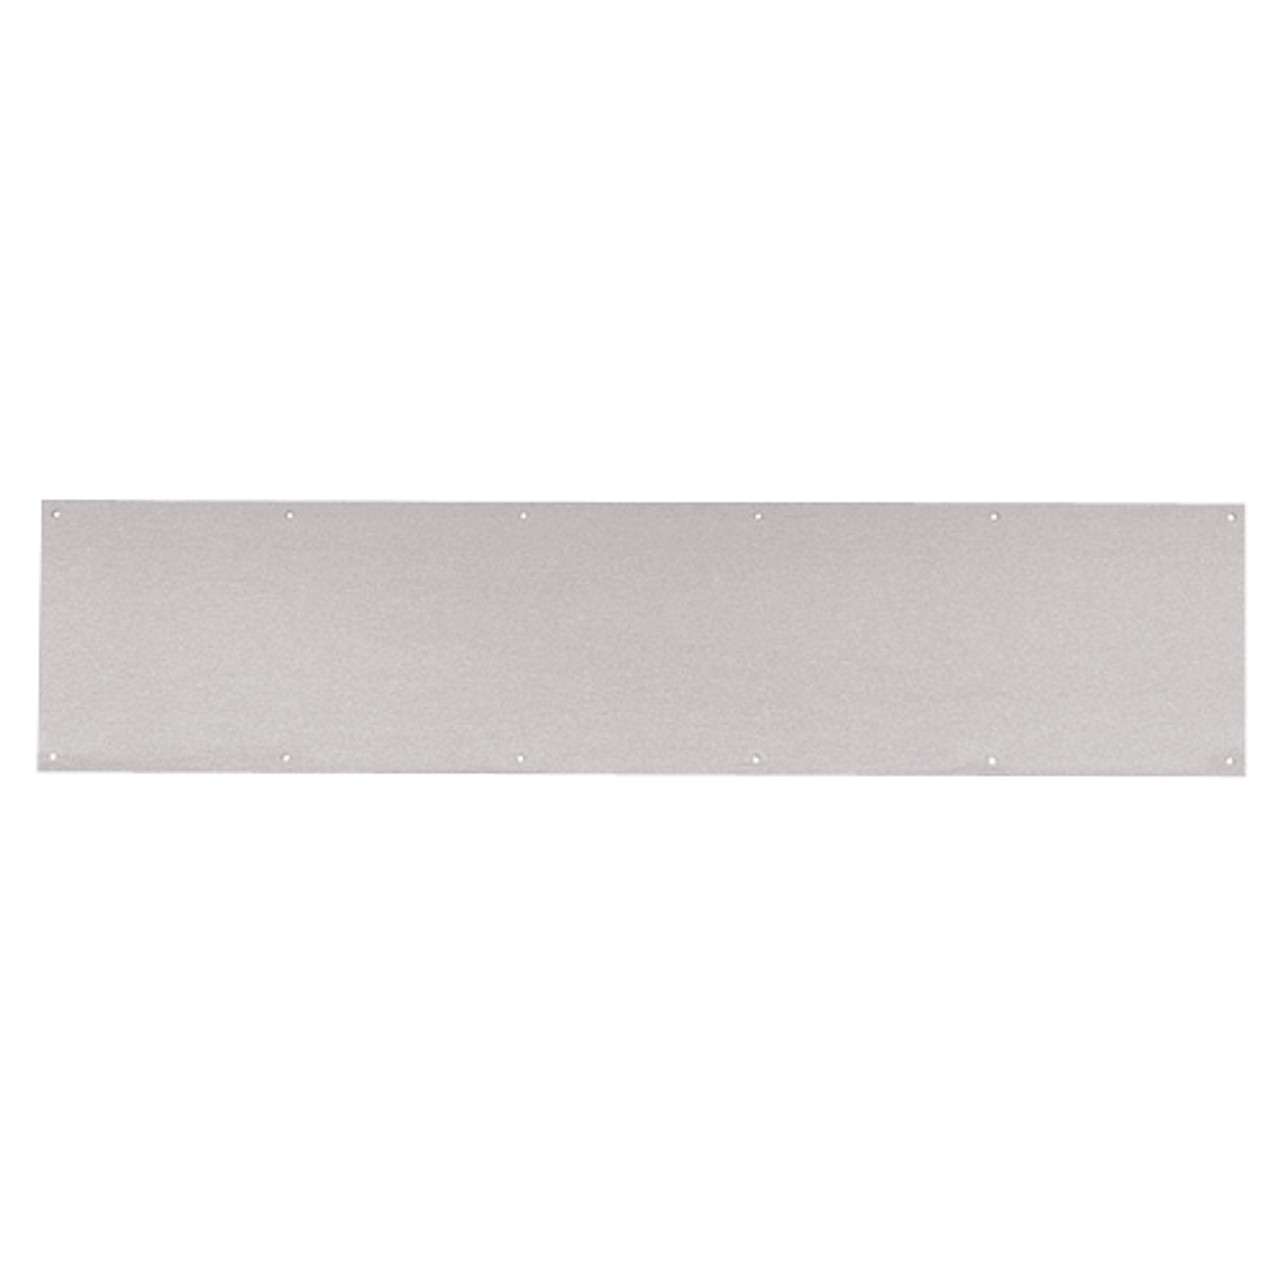 8400-US32D-38x48-B-CS Ives 8400 Series Protection Plate in Satin Stainless Steel